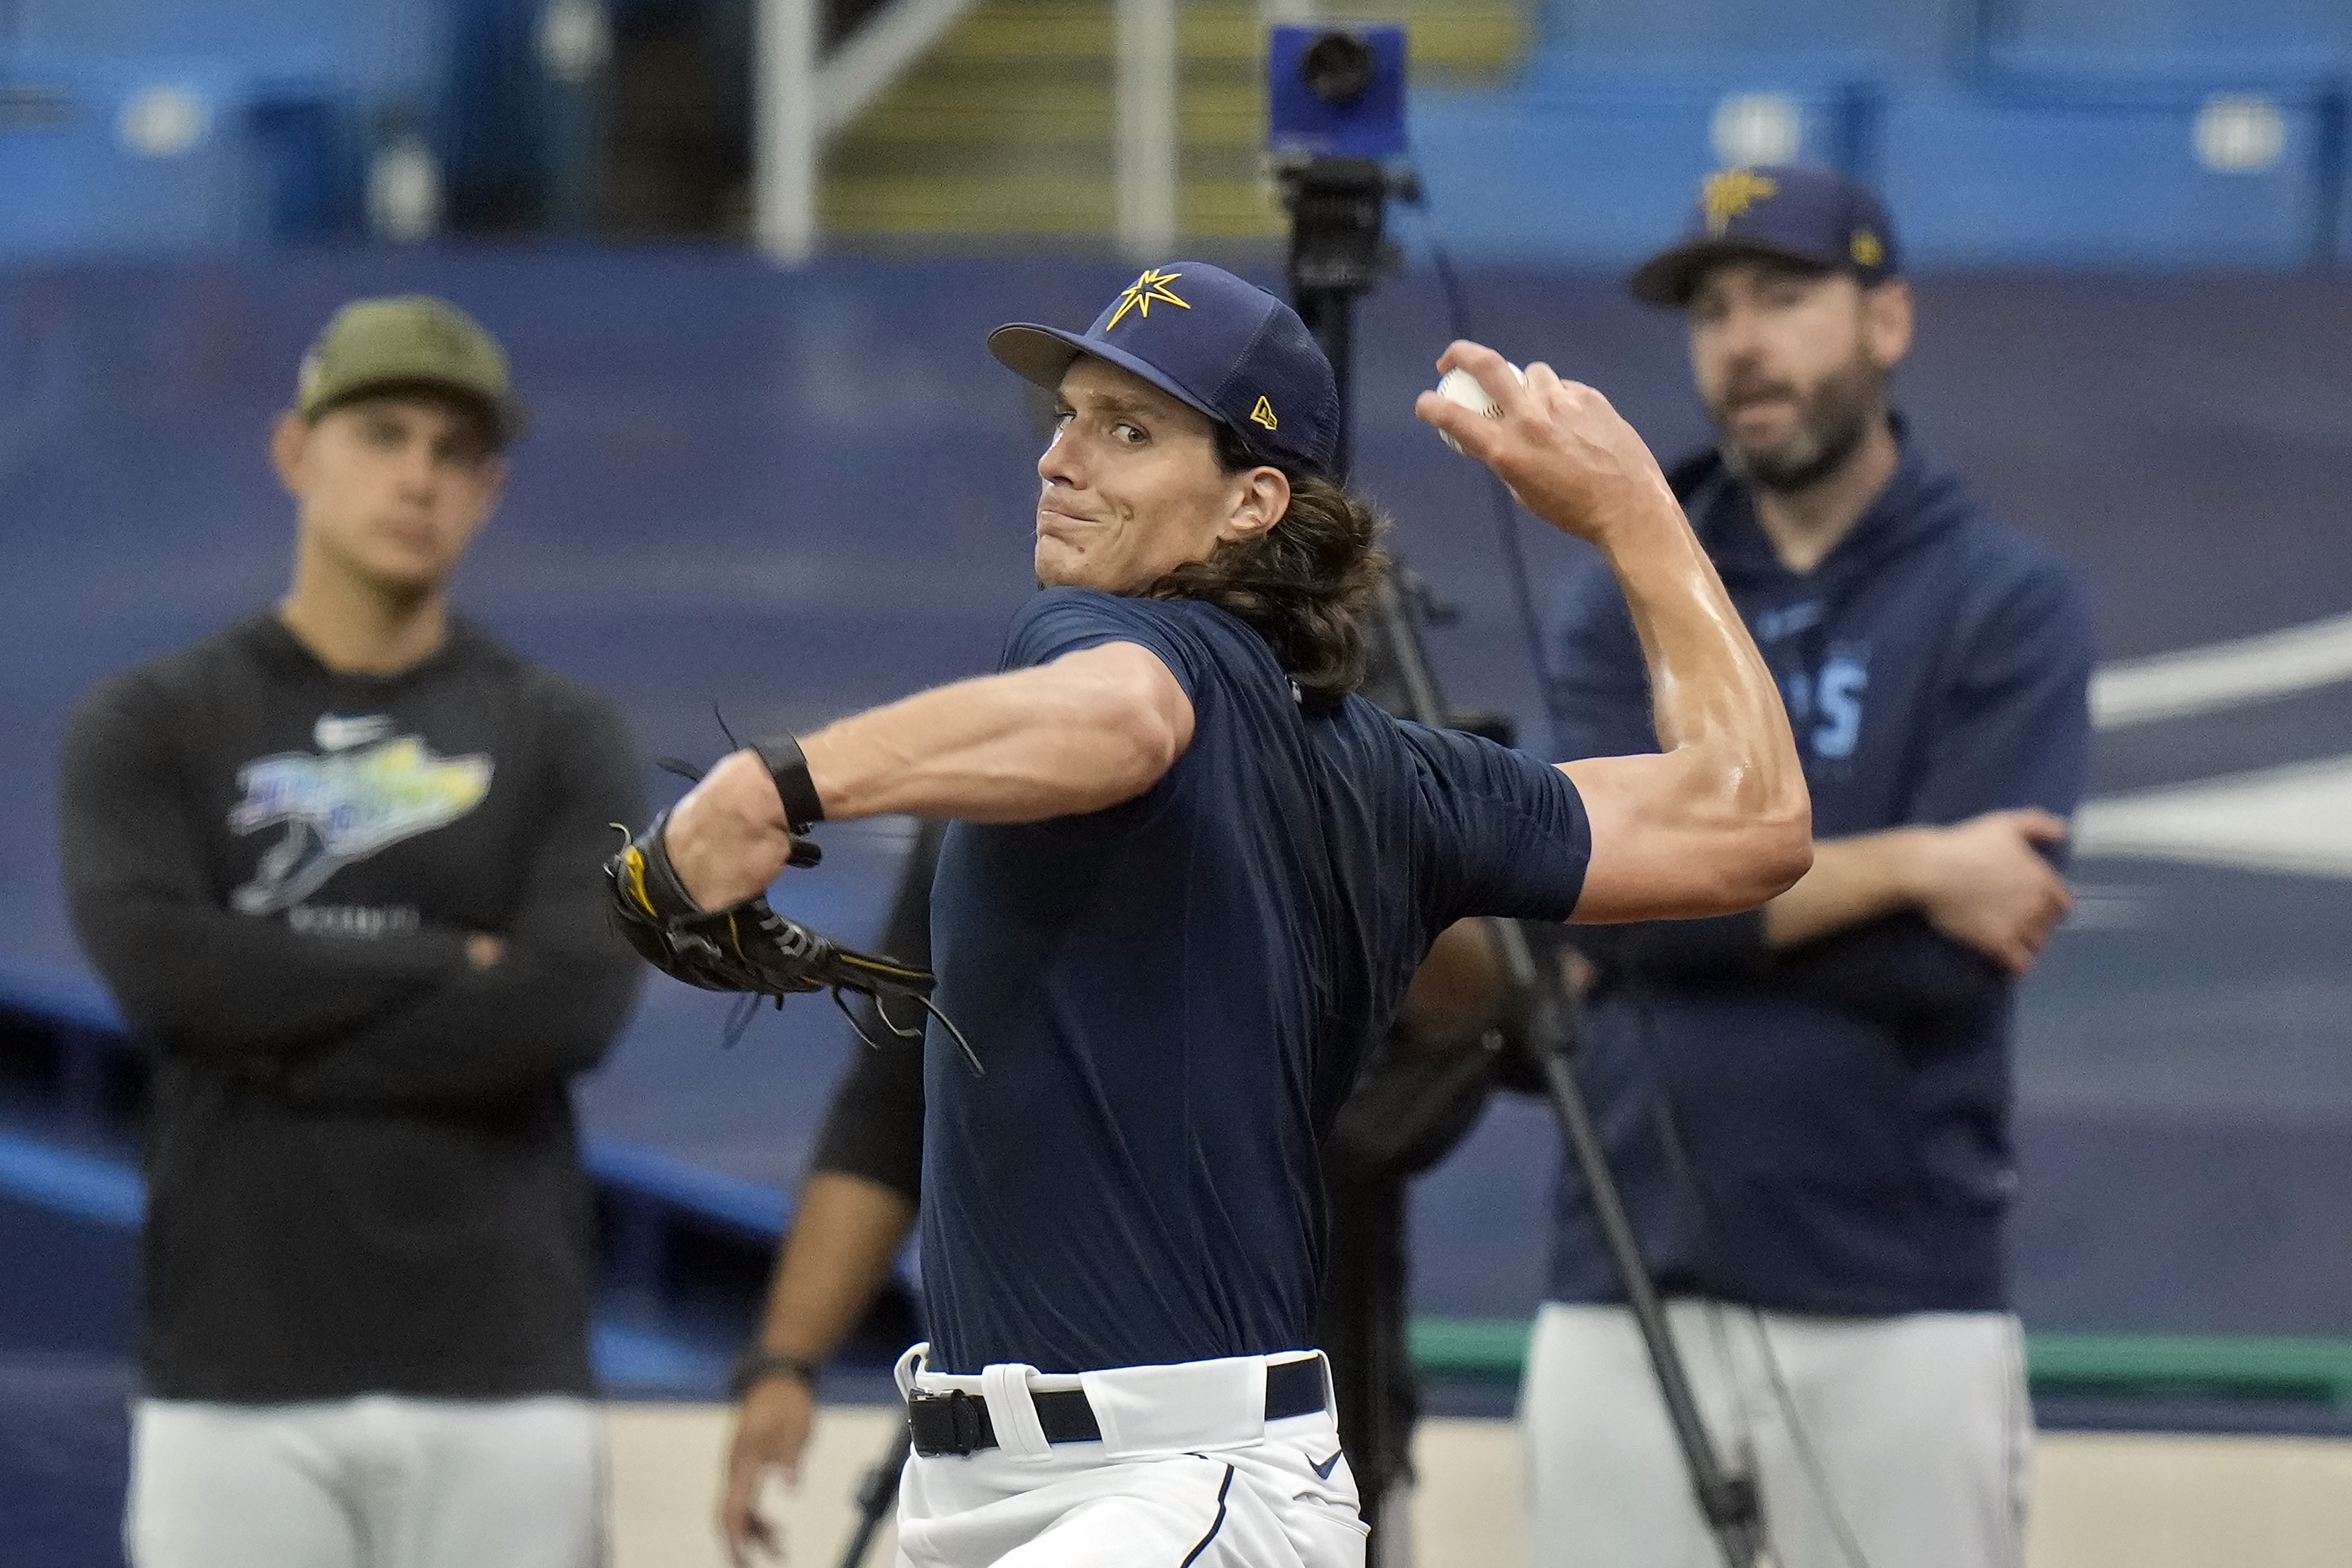 Tampa Bay Rays fans hopeful as long-injured pitcher Tyler Glasnow